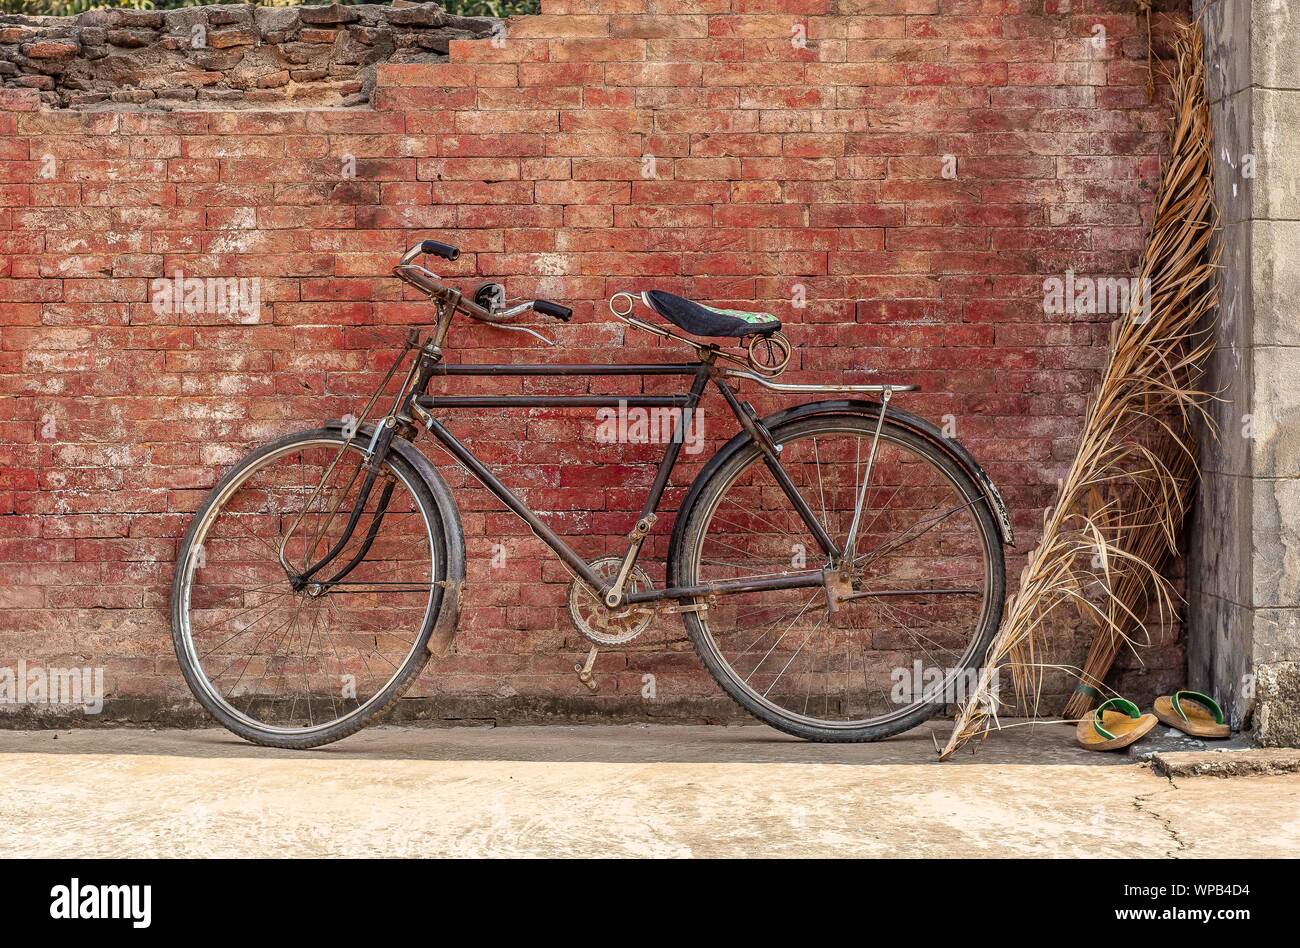 Vintage classic steel old bicycle bike for antique collection and background Stock Photo